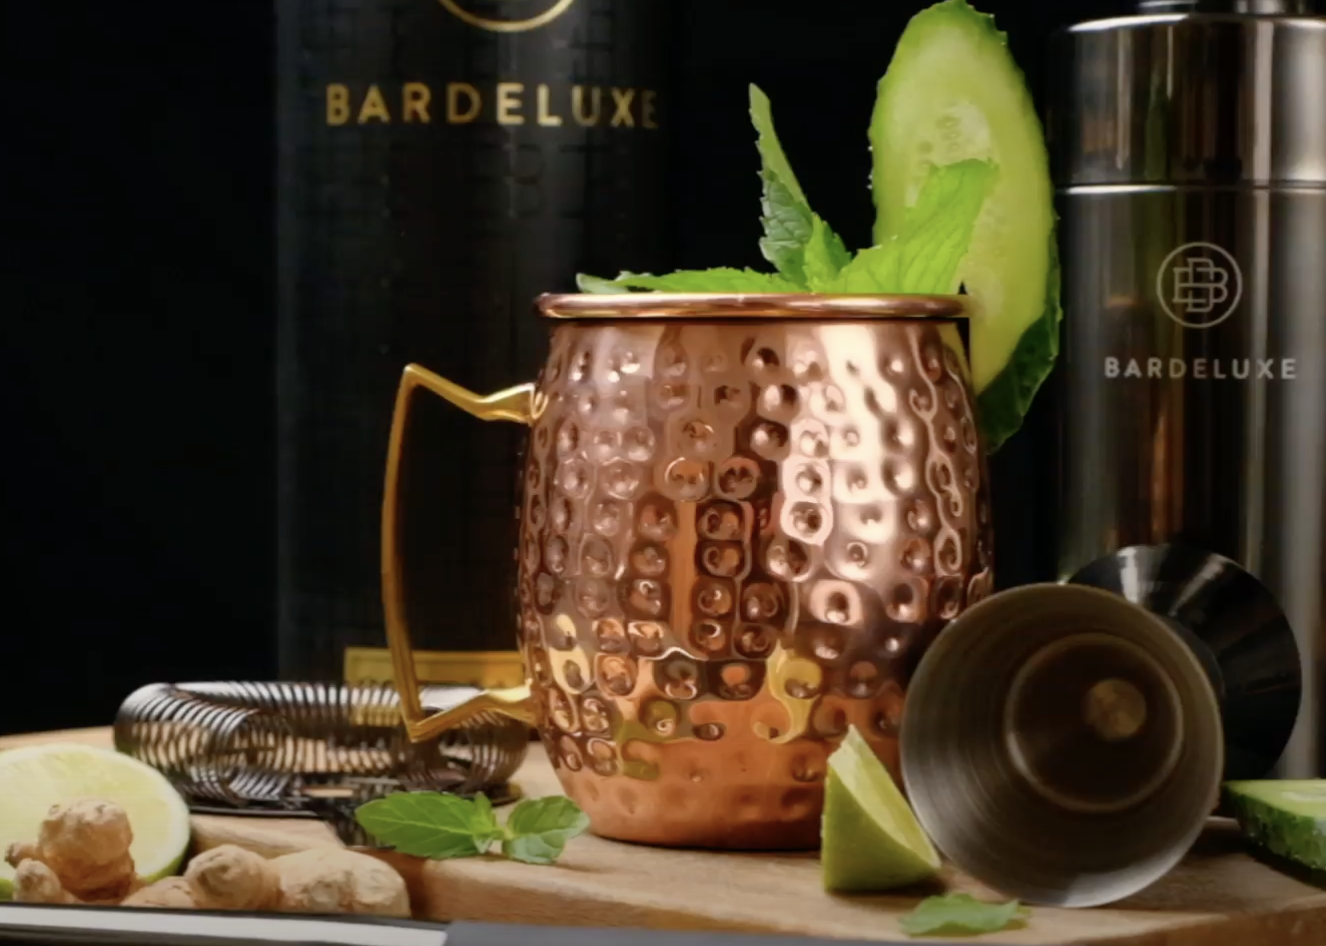 Image of Moscow Mule alkoholfrei